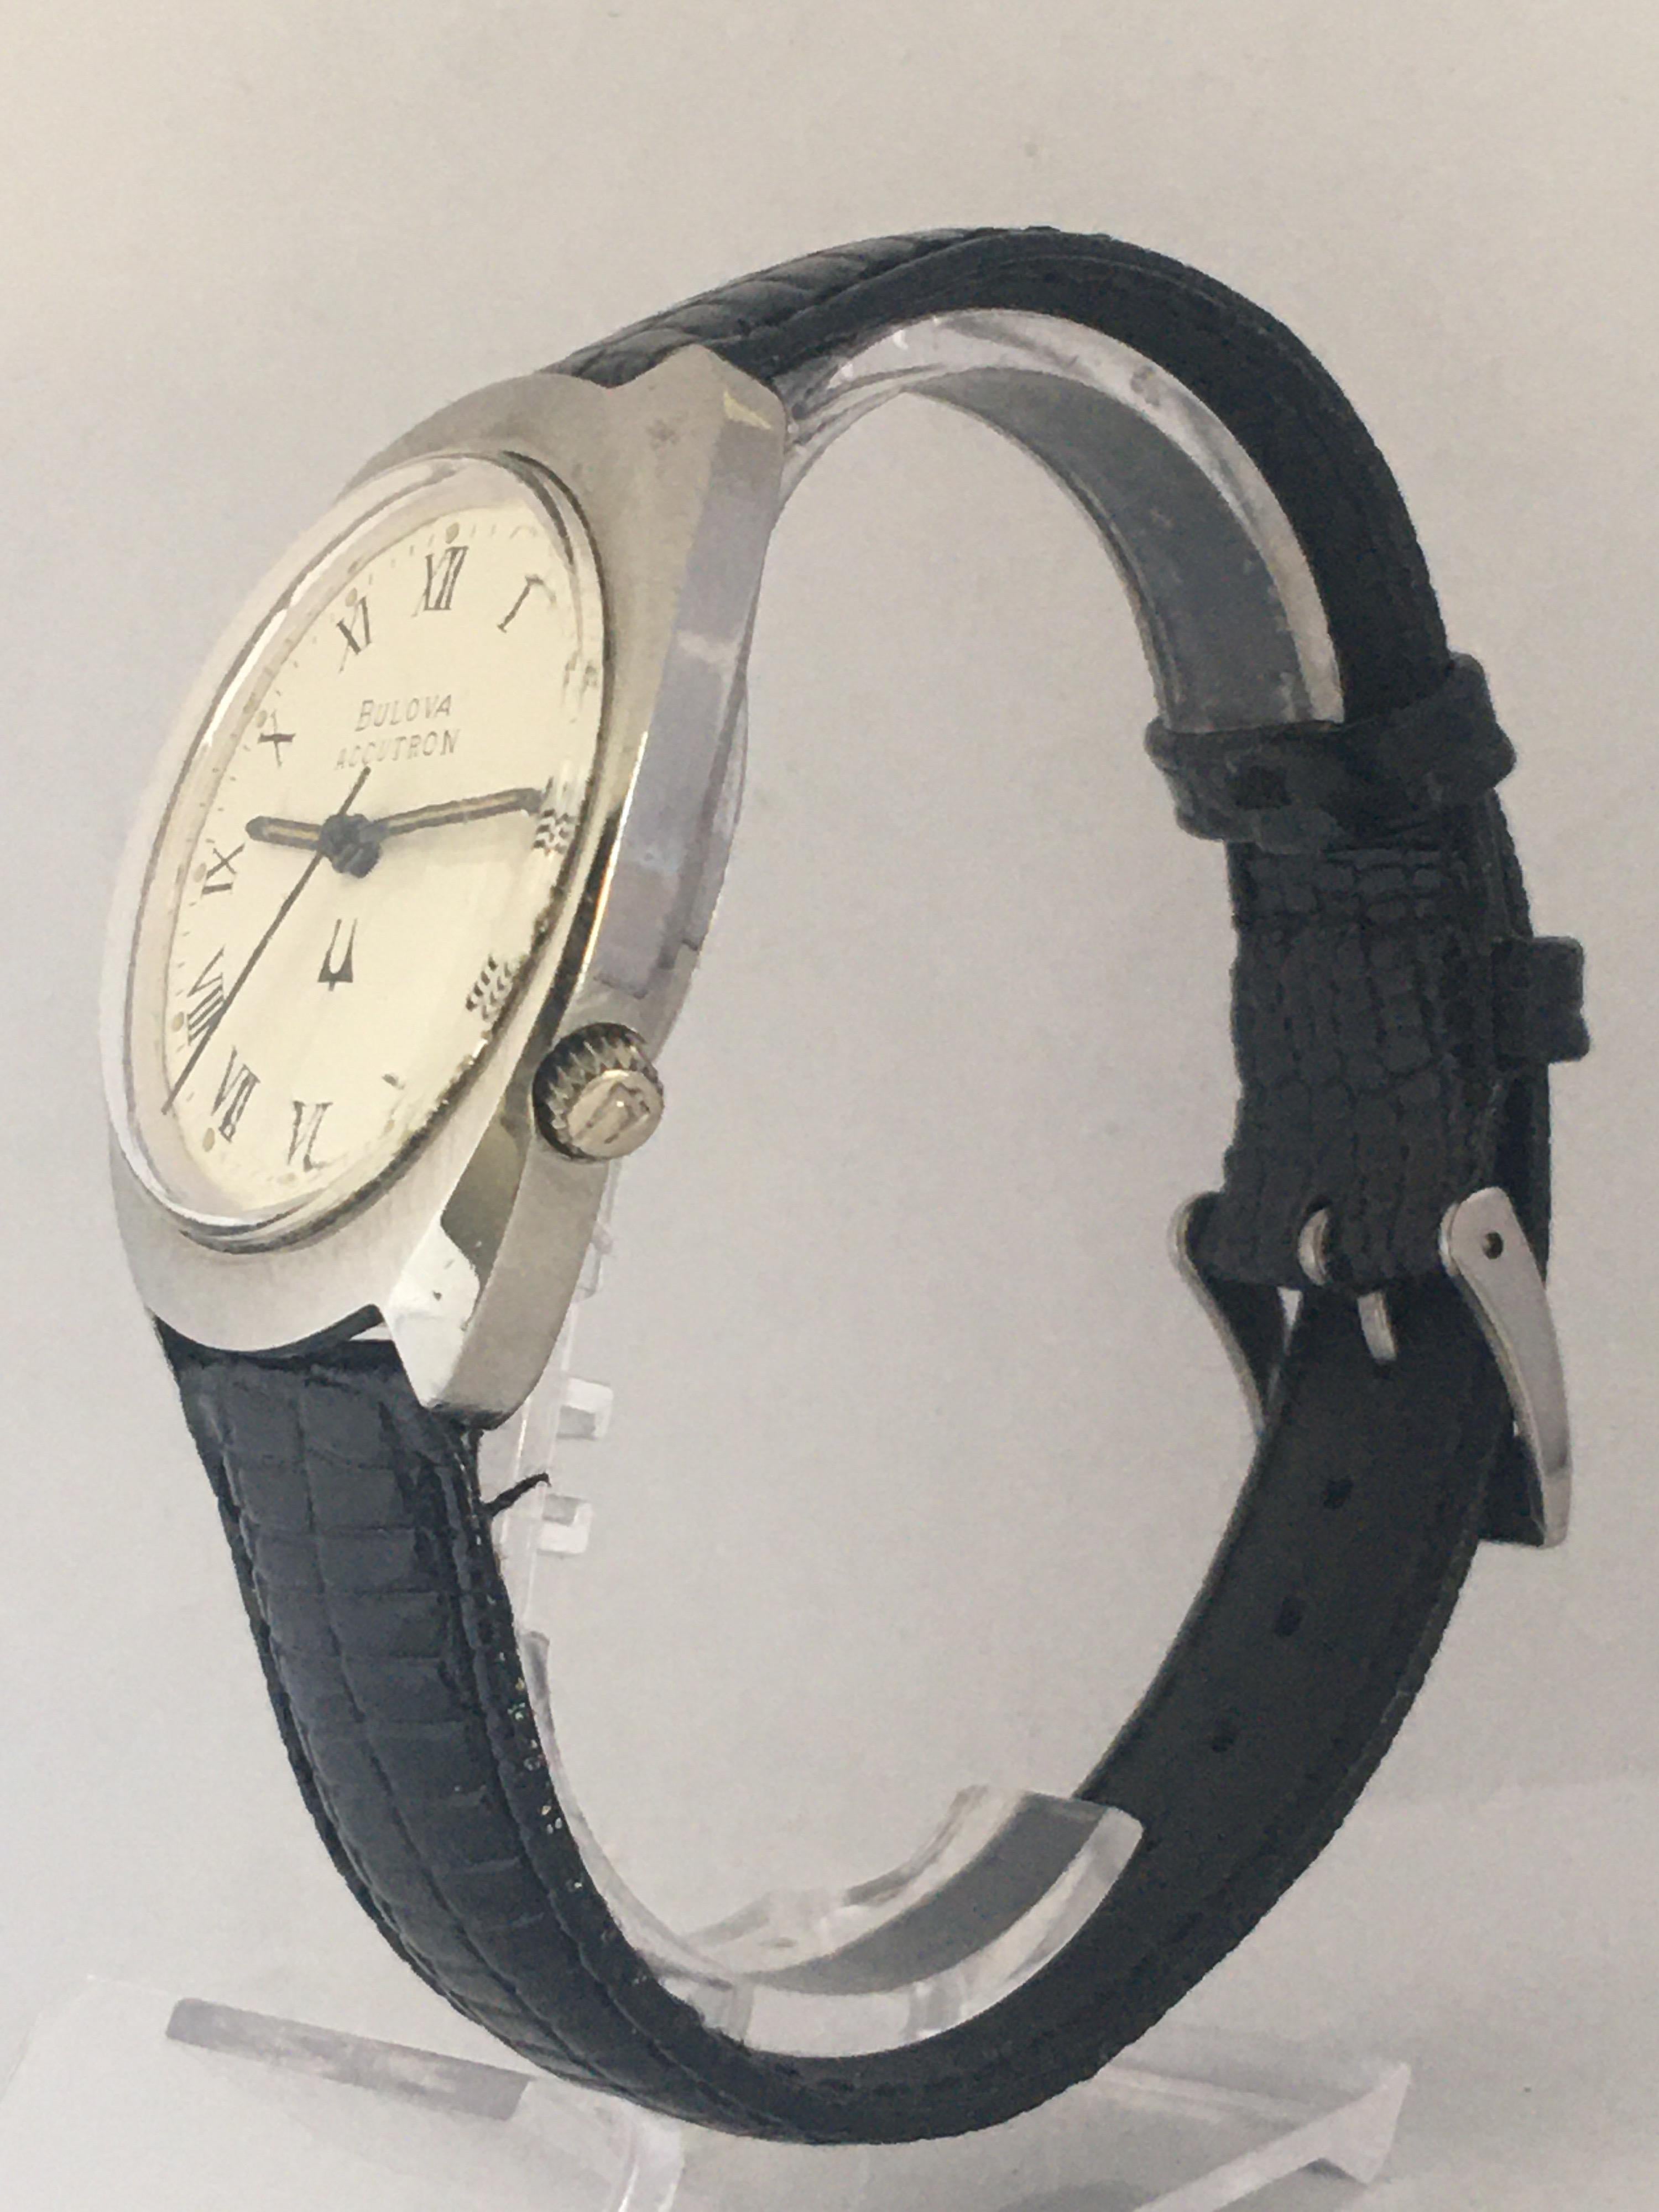 Vintage 1980s Stainless Steel Bulova Accutron Watch In Good Condition For Sale In Carlisle, GB